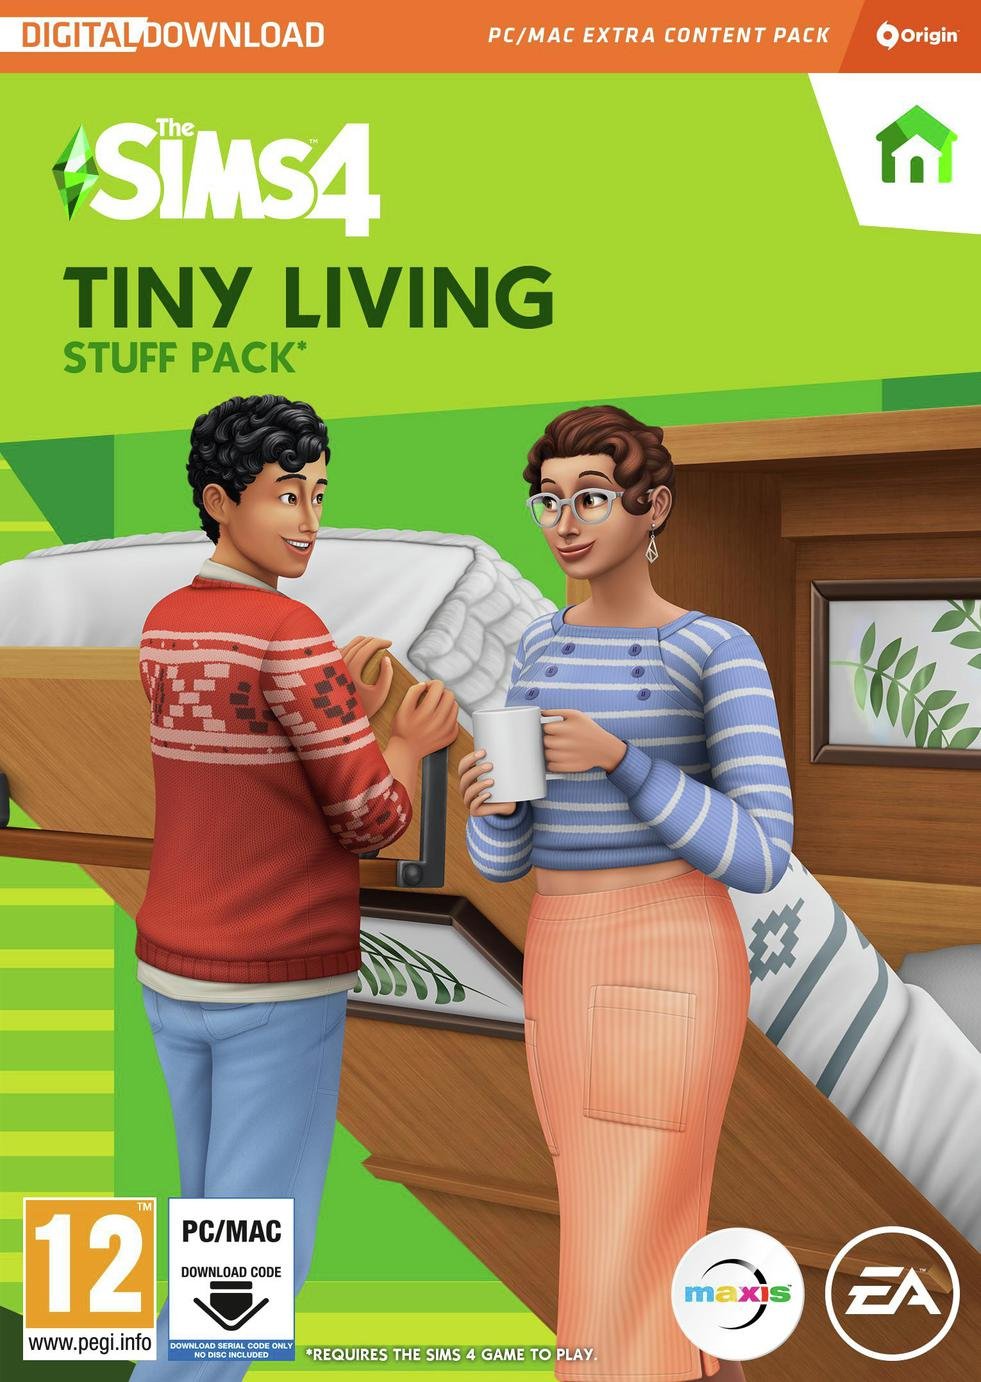 The Sims 4 Tiny Living Stuff Pack PC Game